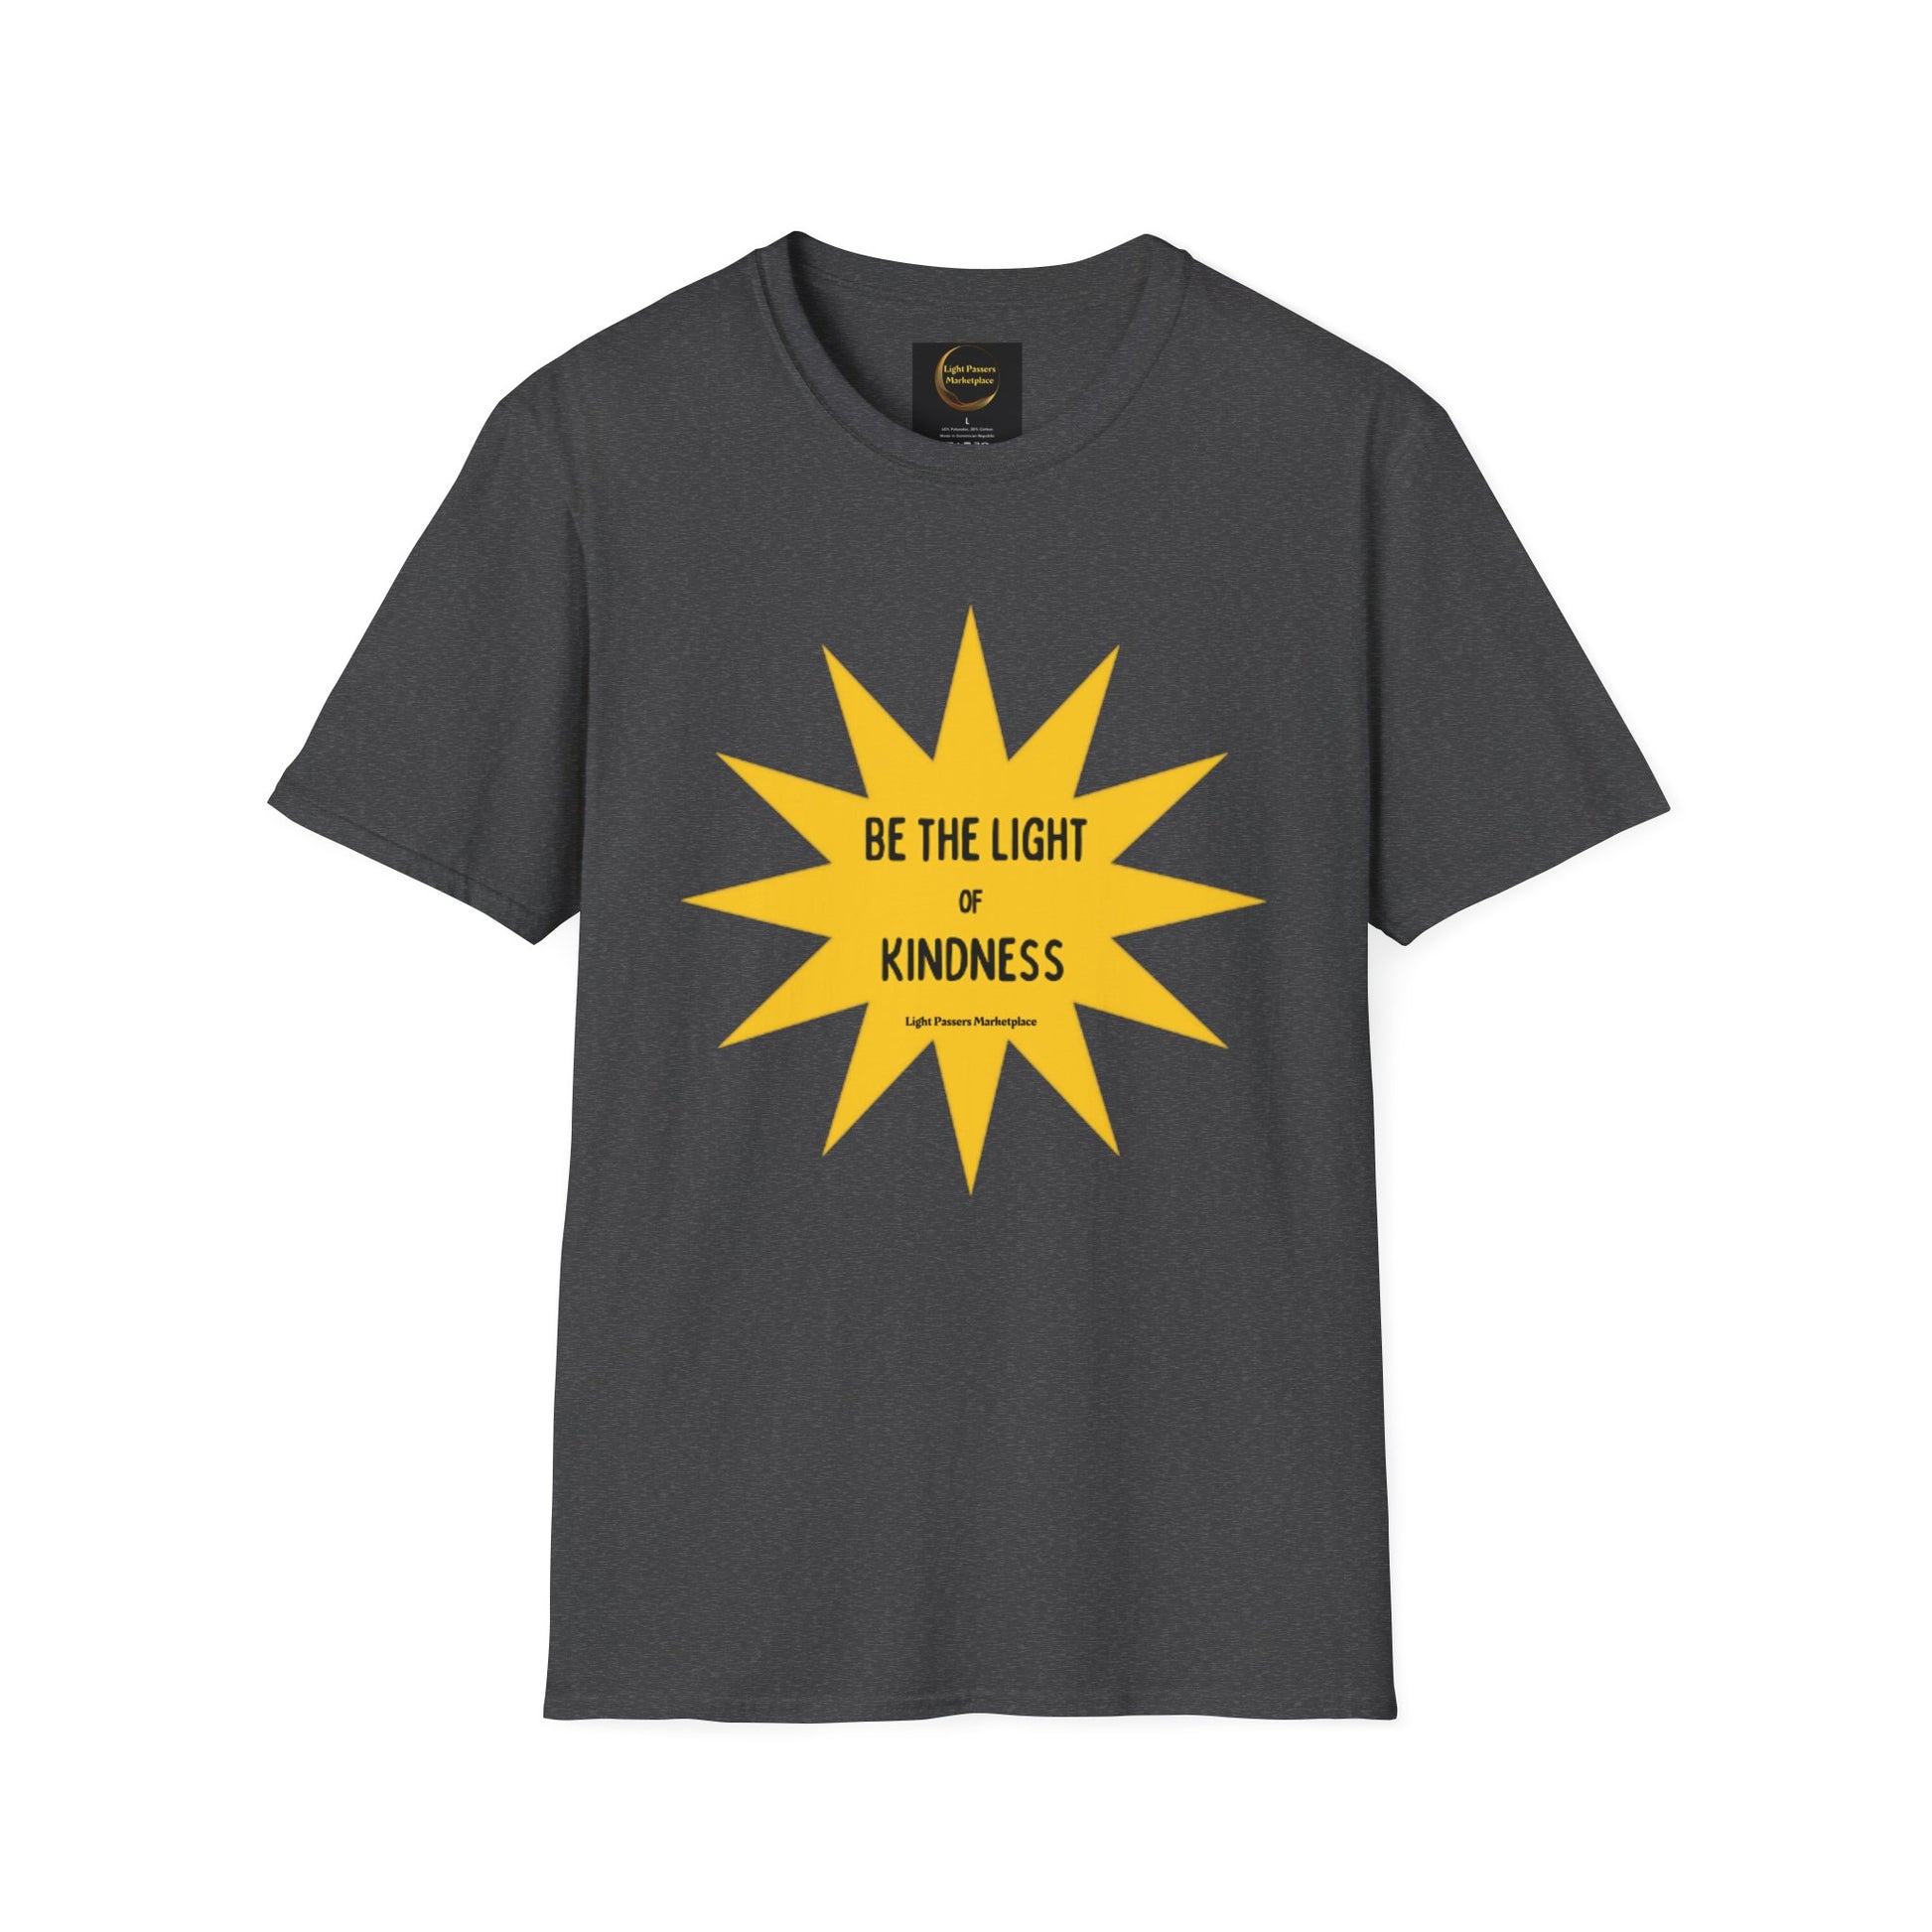 Unisex grey t-shirt featuring a yellow sun and black text design. 100% cotton, no side seams, tear-away label, classic fit. Ideal for casual fashion with personalized prints.